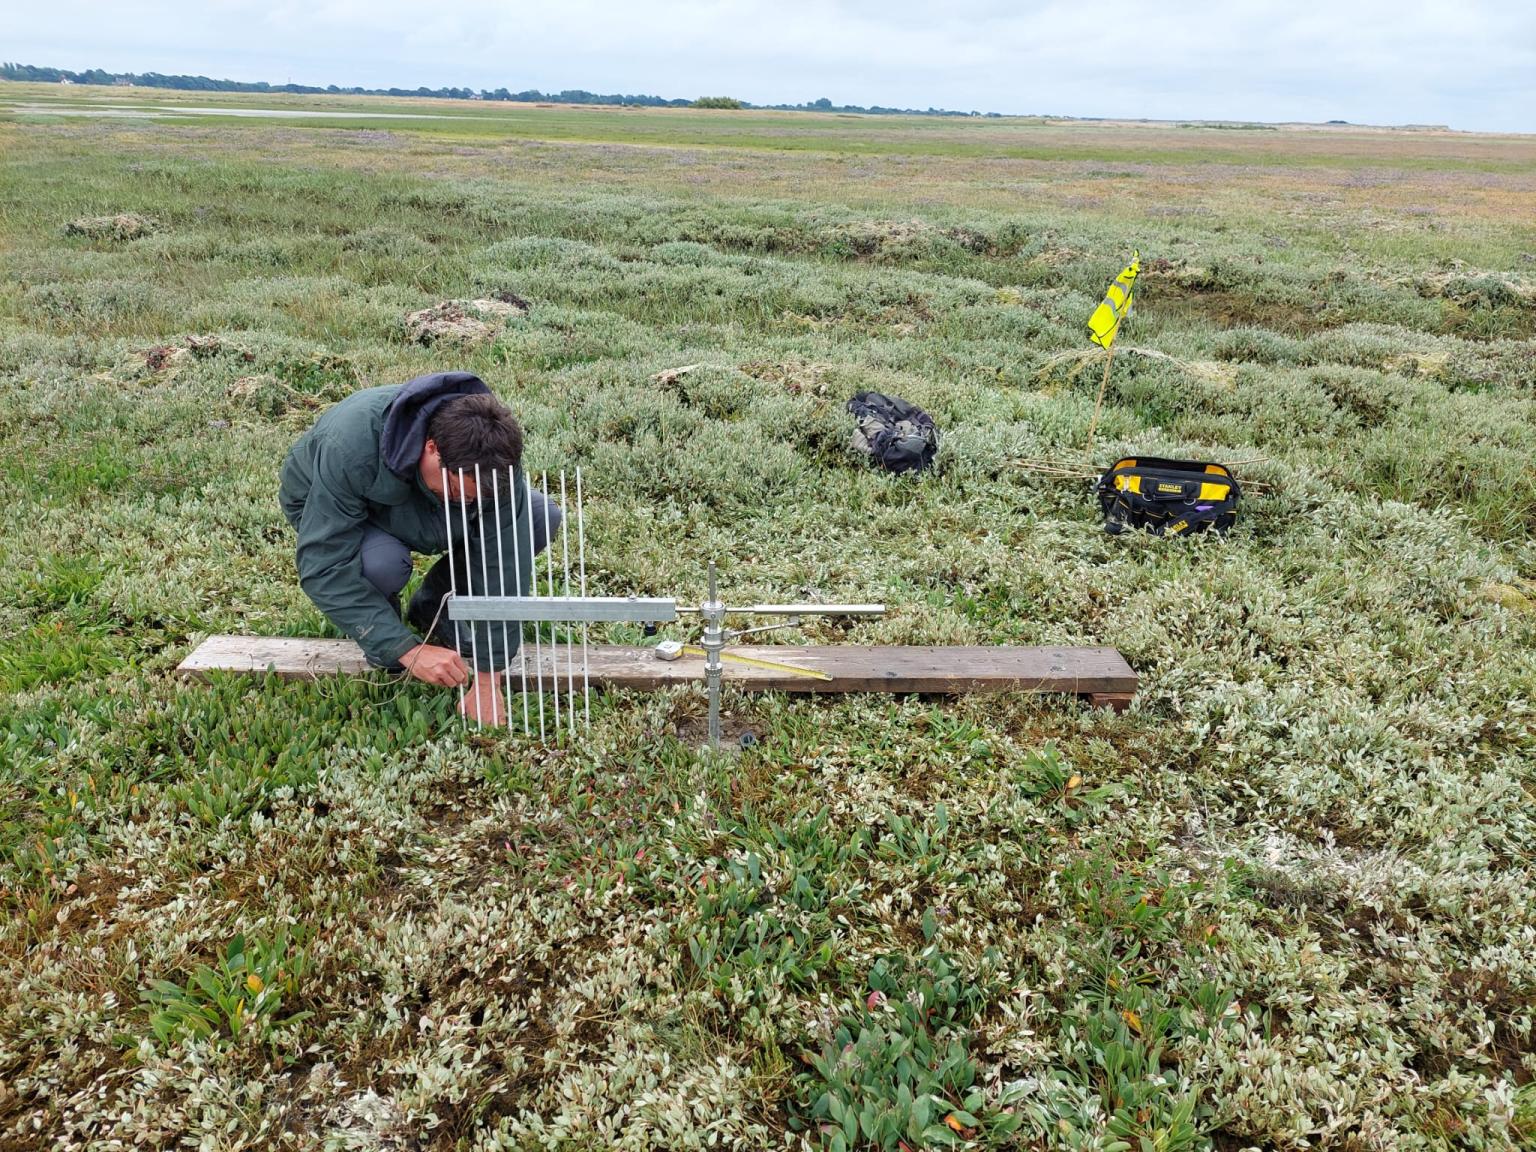 A scientist in outdoor gear is perched on a wooden platform amongst a bed of purslane. They are adjusting long white pins which pass through a metal T shaped device attached to a post set in the marsh.